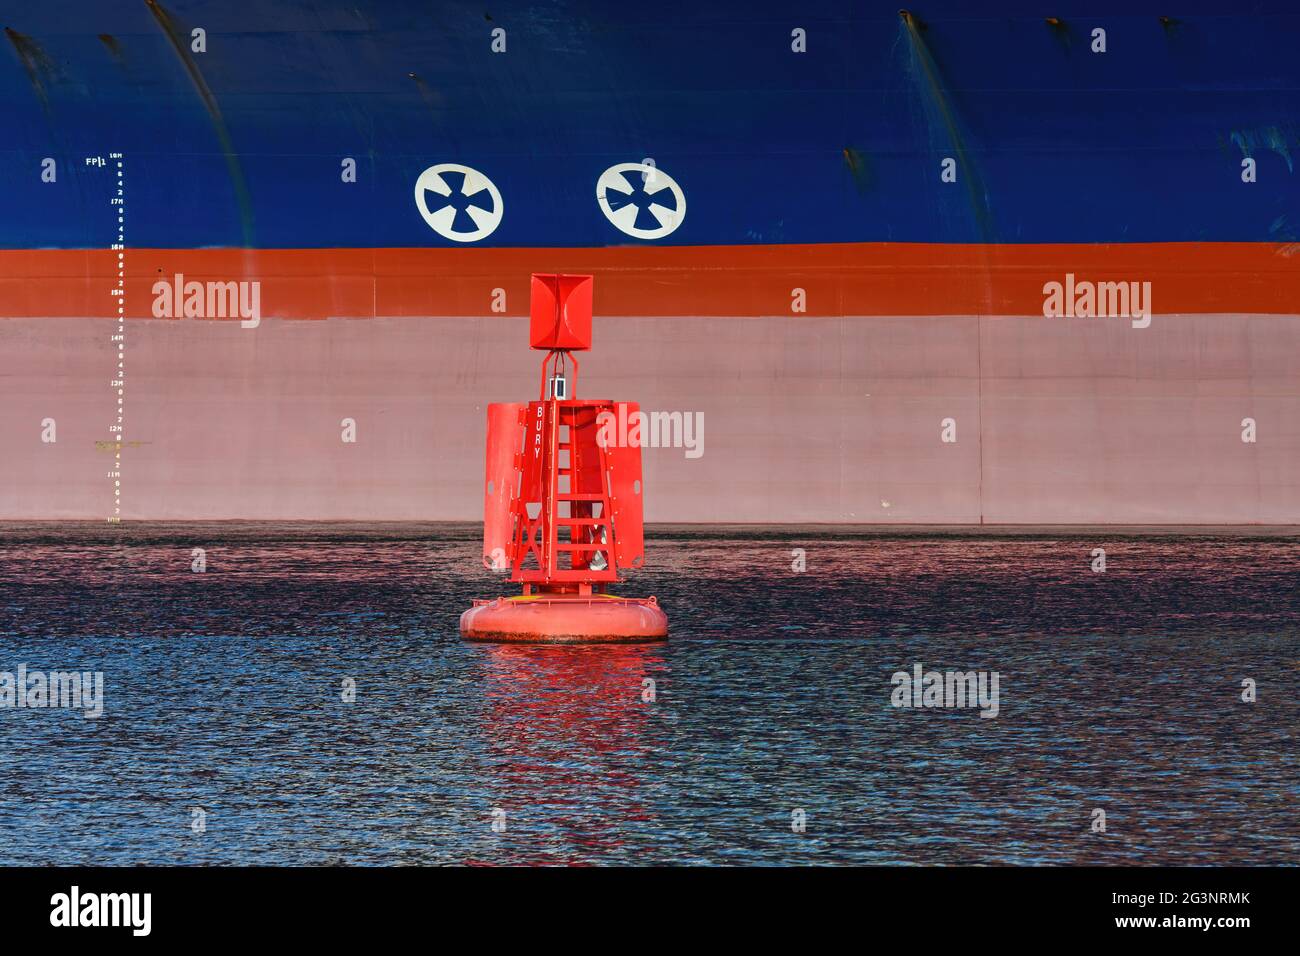 Graphic image of the waterline markings of a container ship and a red navigation buoy at the Port of Southampton - December 2020 Stock Photo